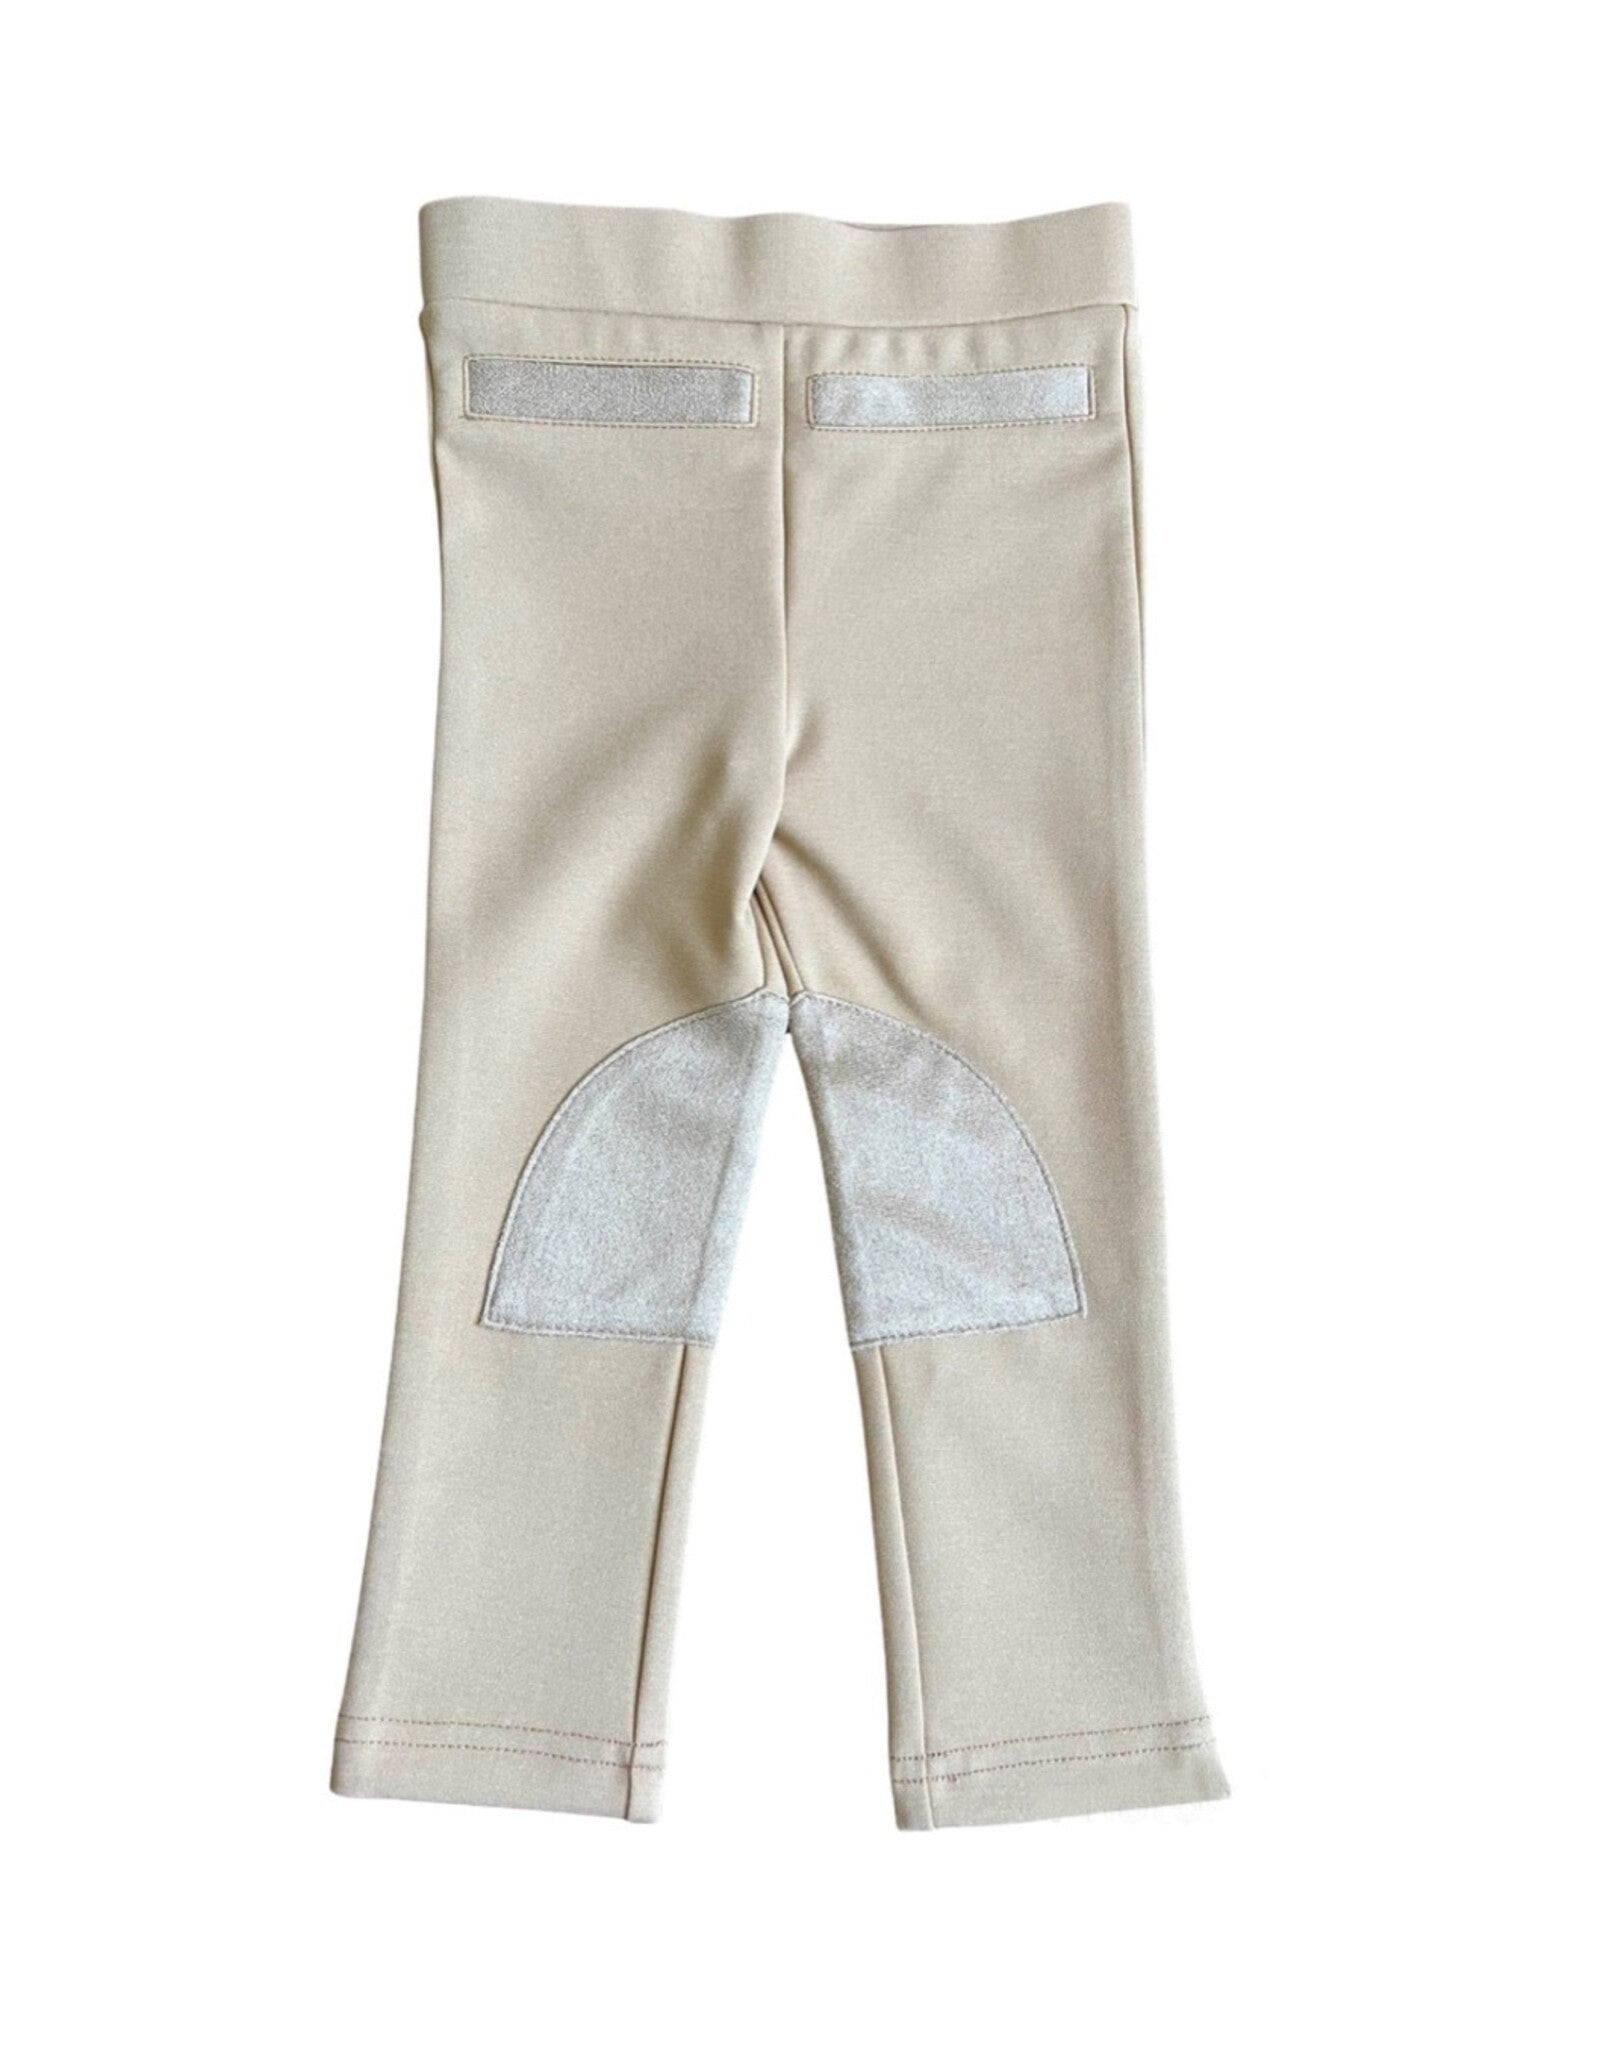 Belle & Bow Baby Breeches - Tan